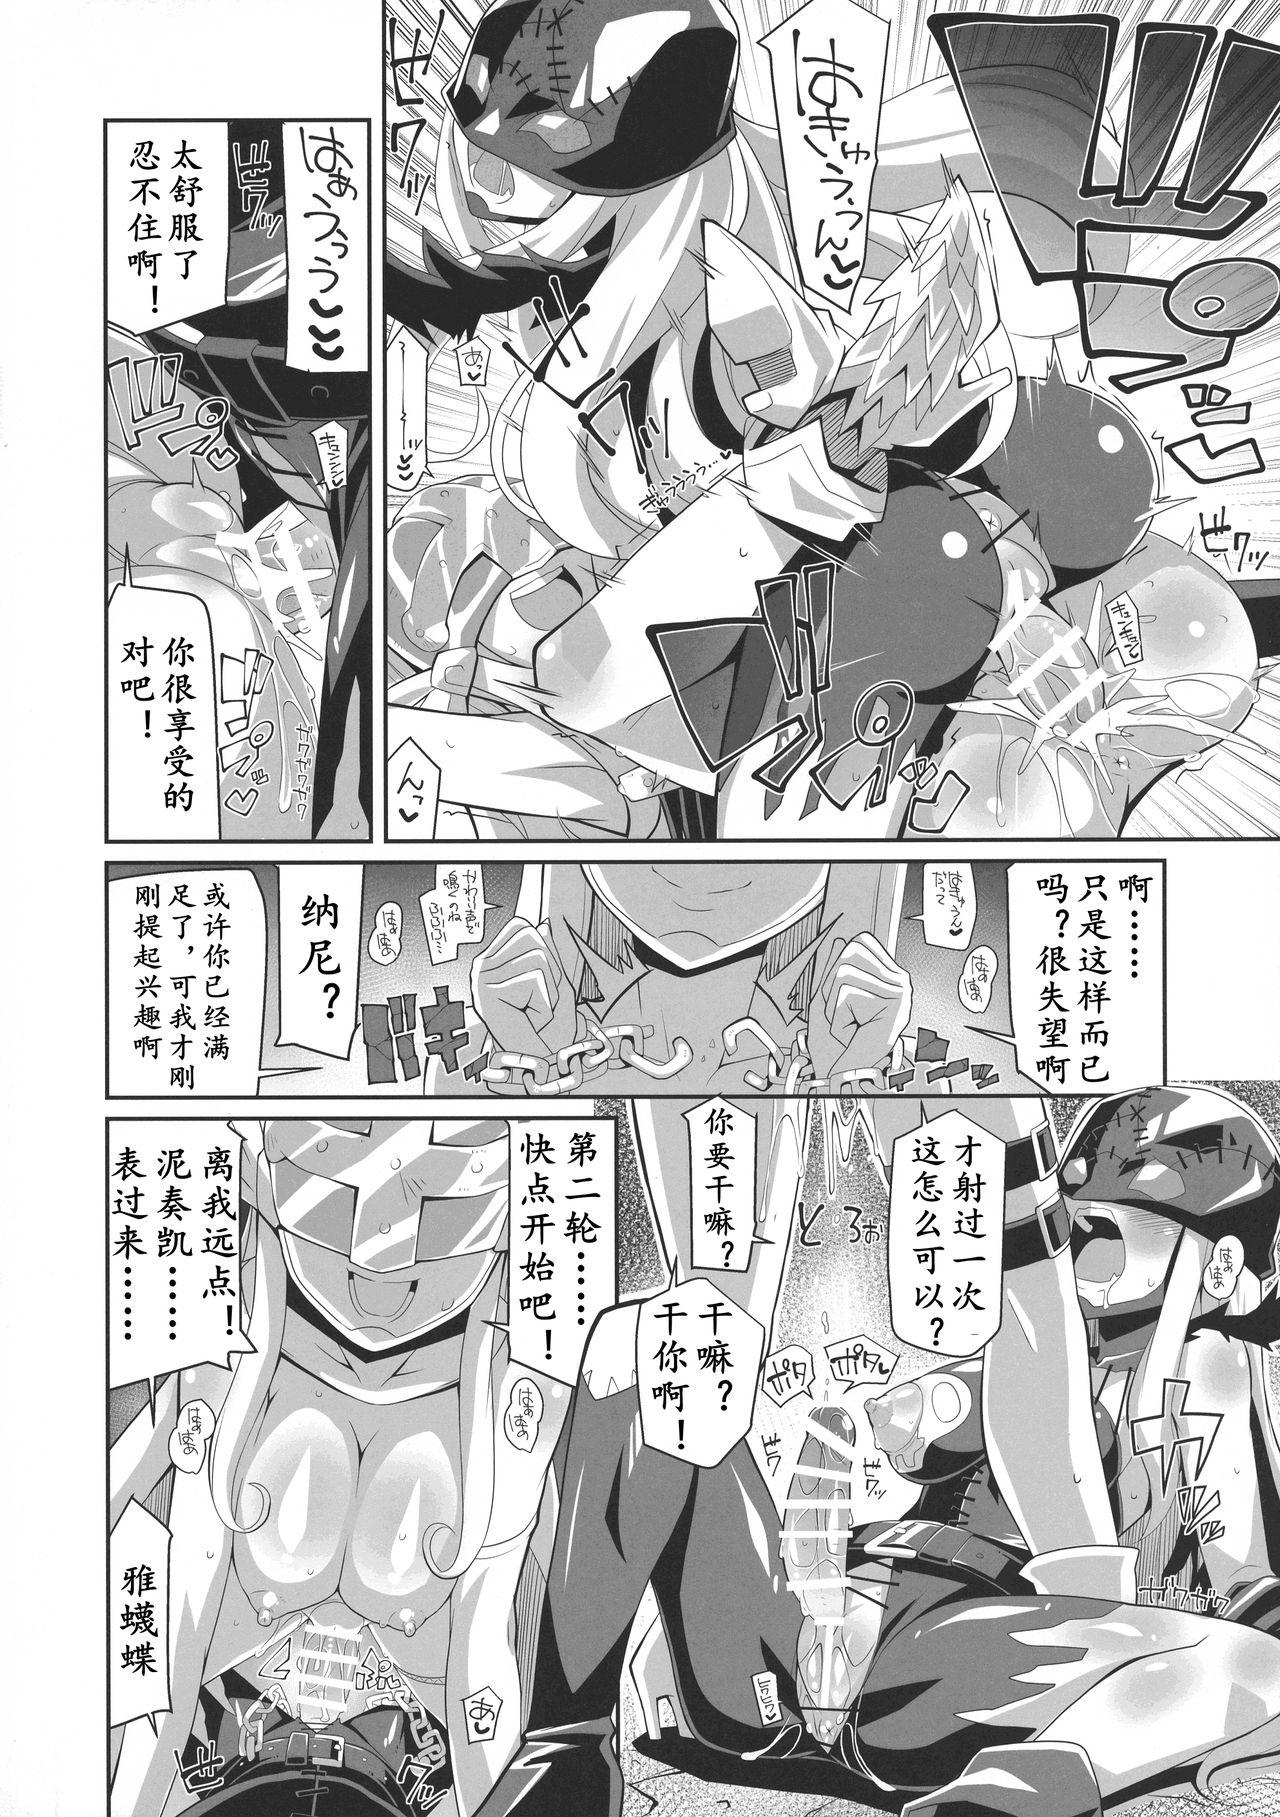 Home ANGELSxDEMONS | 莫斯提兽 - Digimon Stepdaughter - Page 7